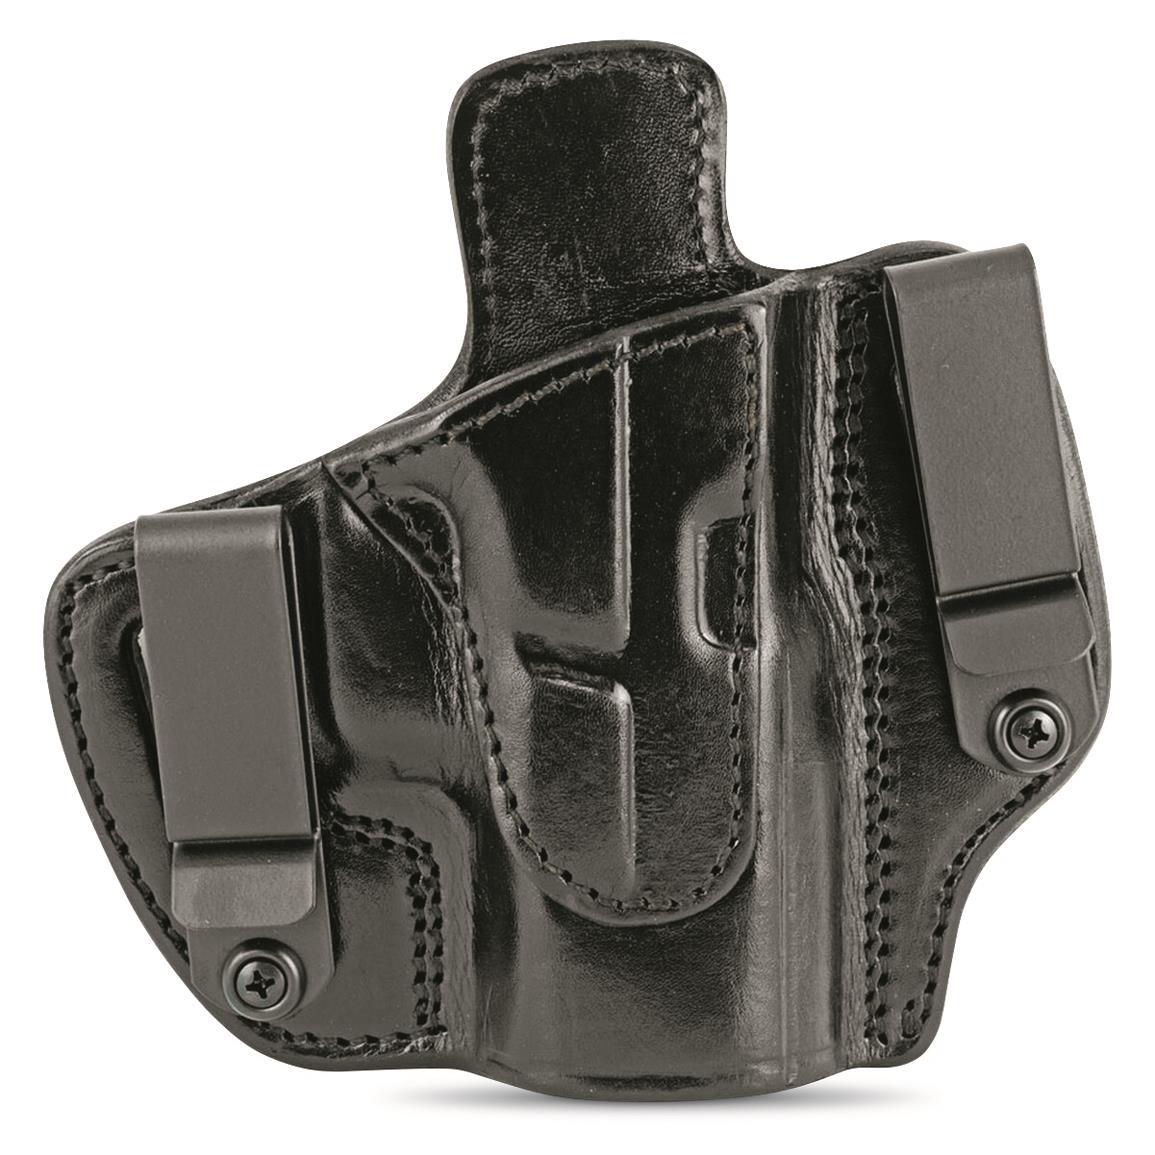 Tagua Crusader Black Leather OWB/IWB Holster, Full-Size 1911s